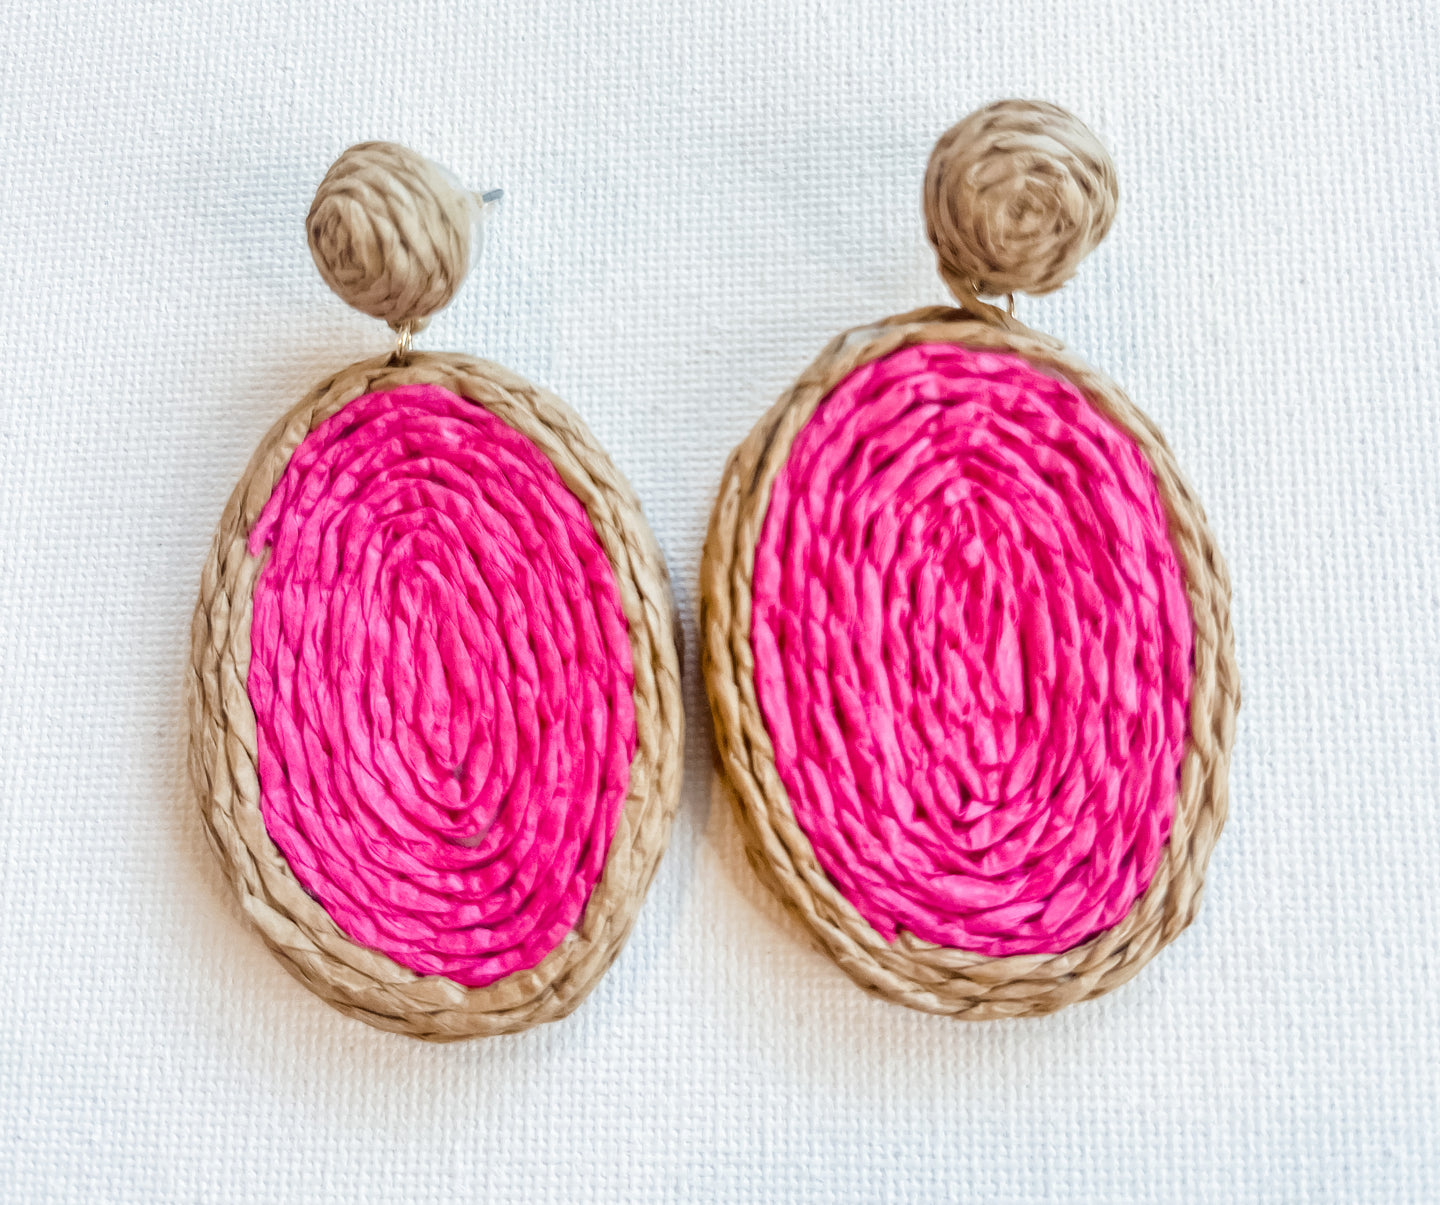 Hot pink and natural rattan earrings